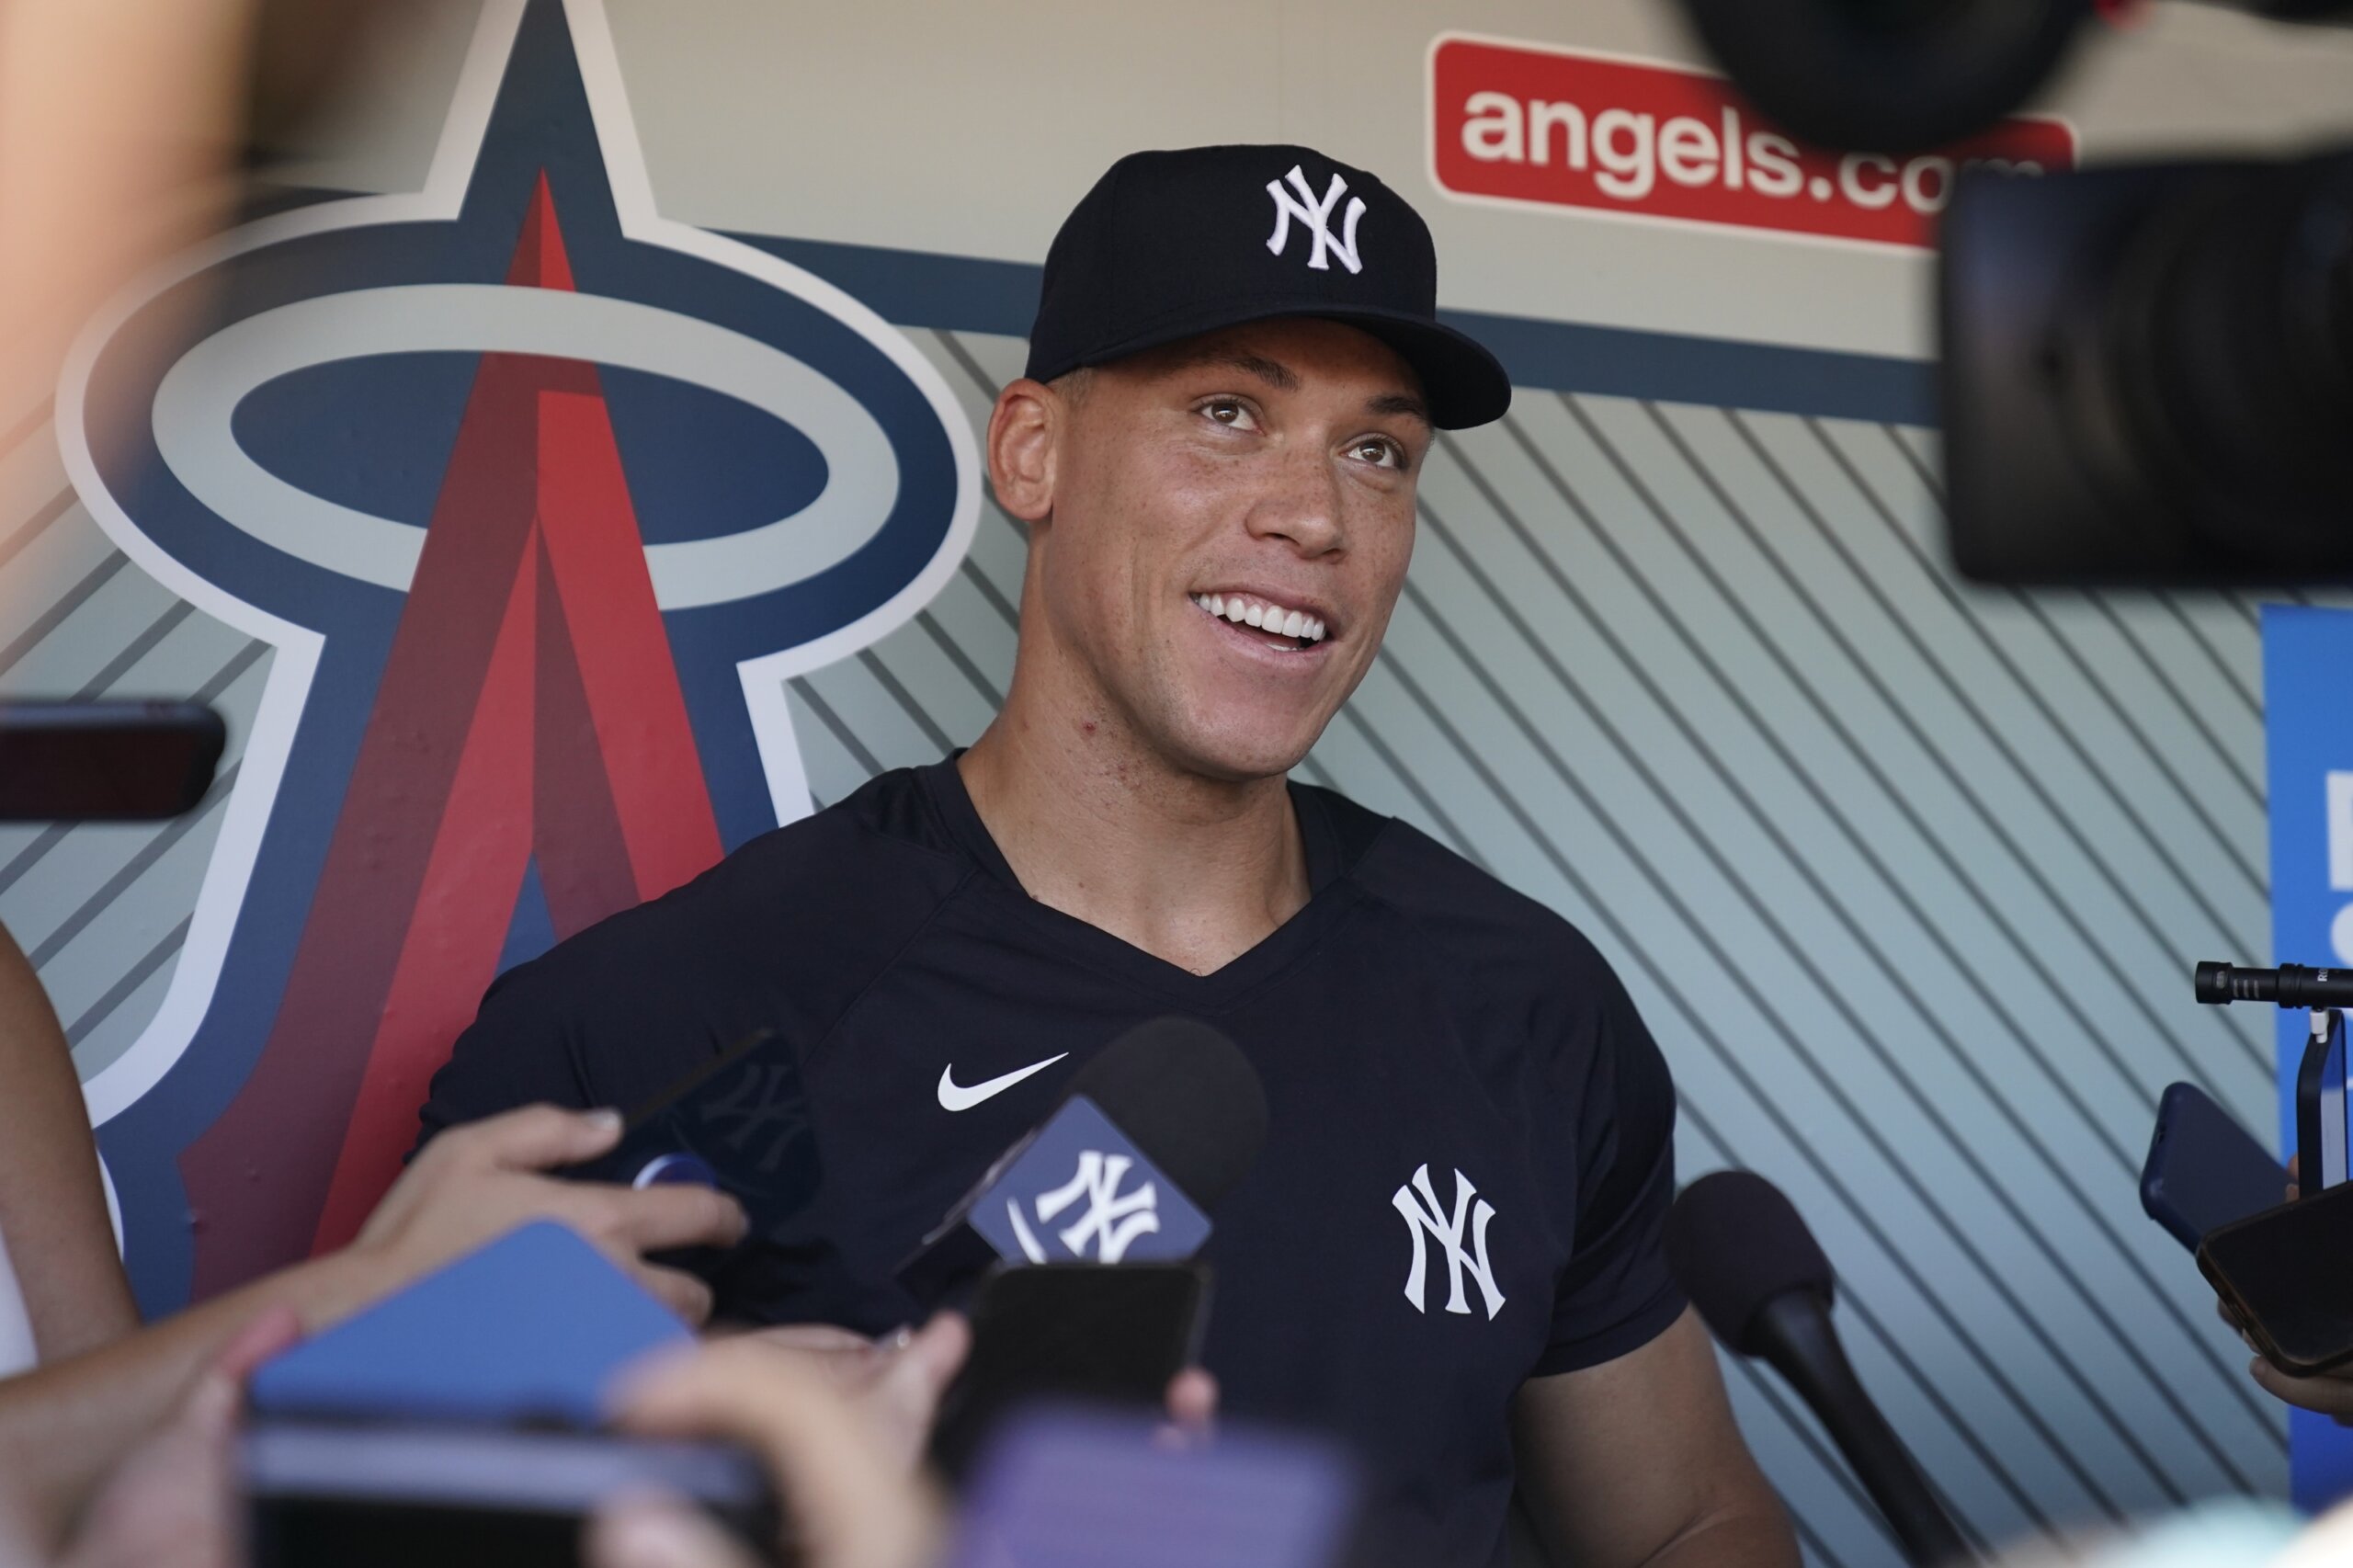 Aaron Judge returns to Yankees lineup from injured list